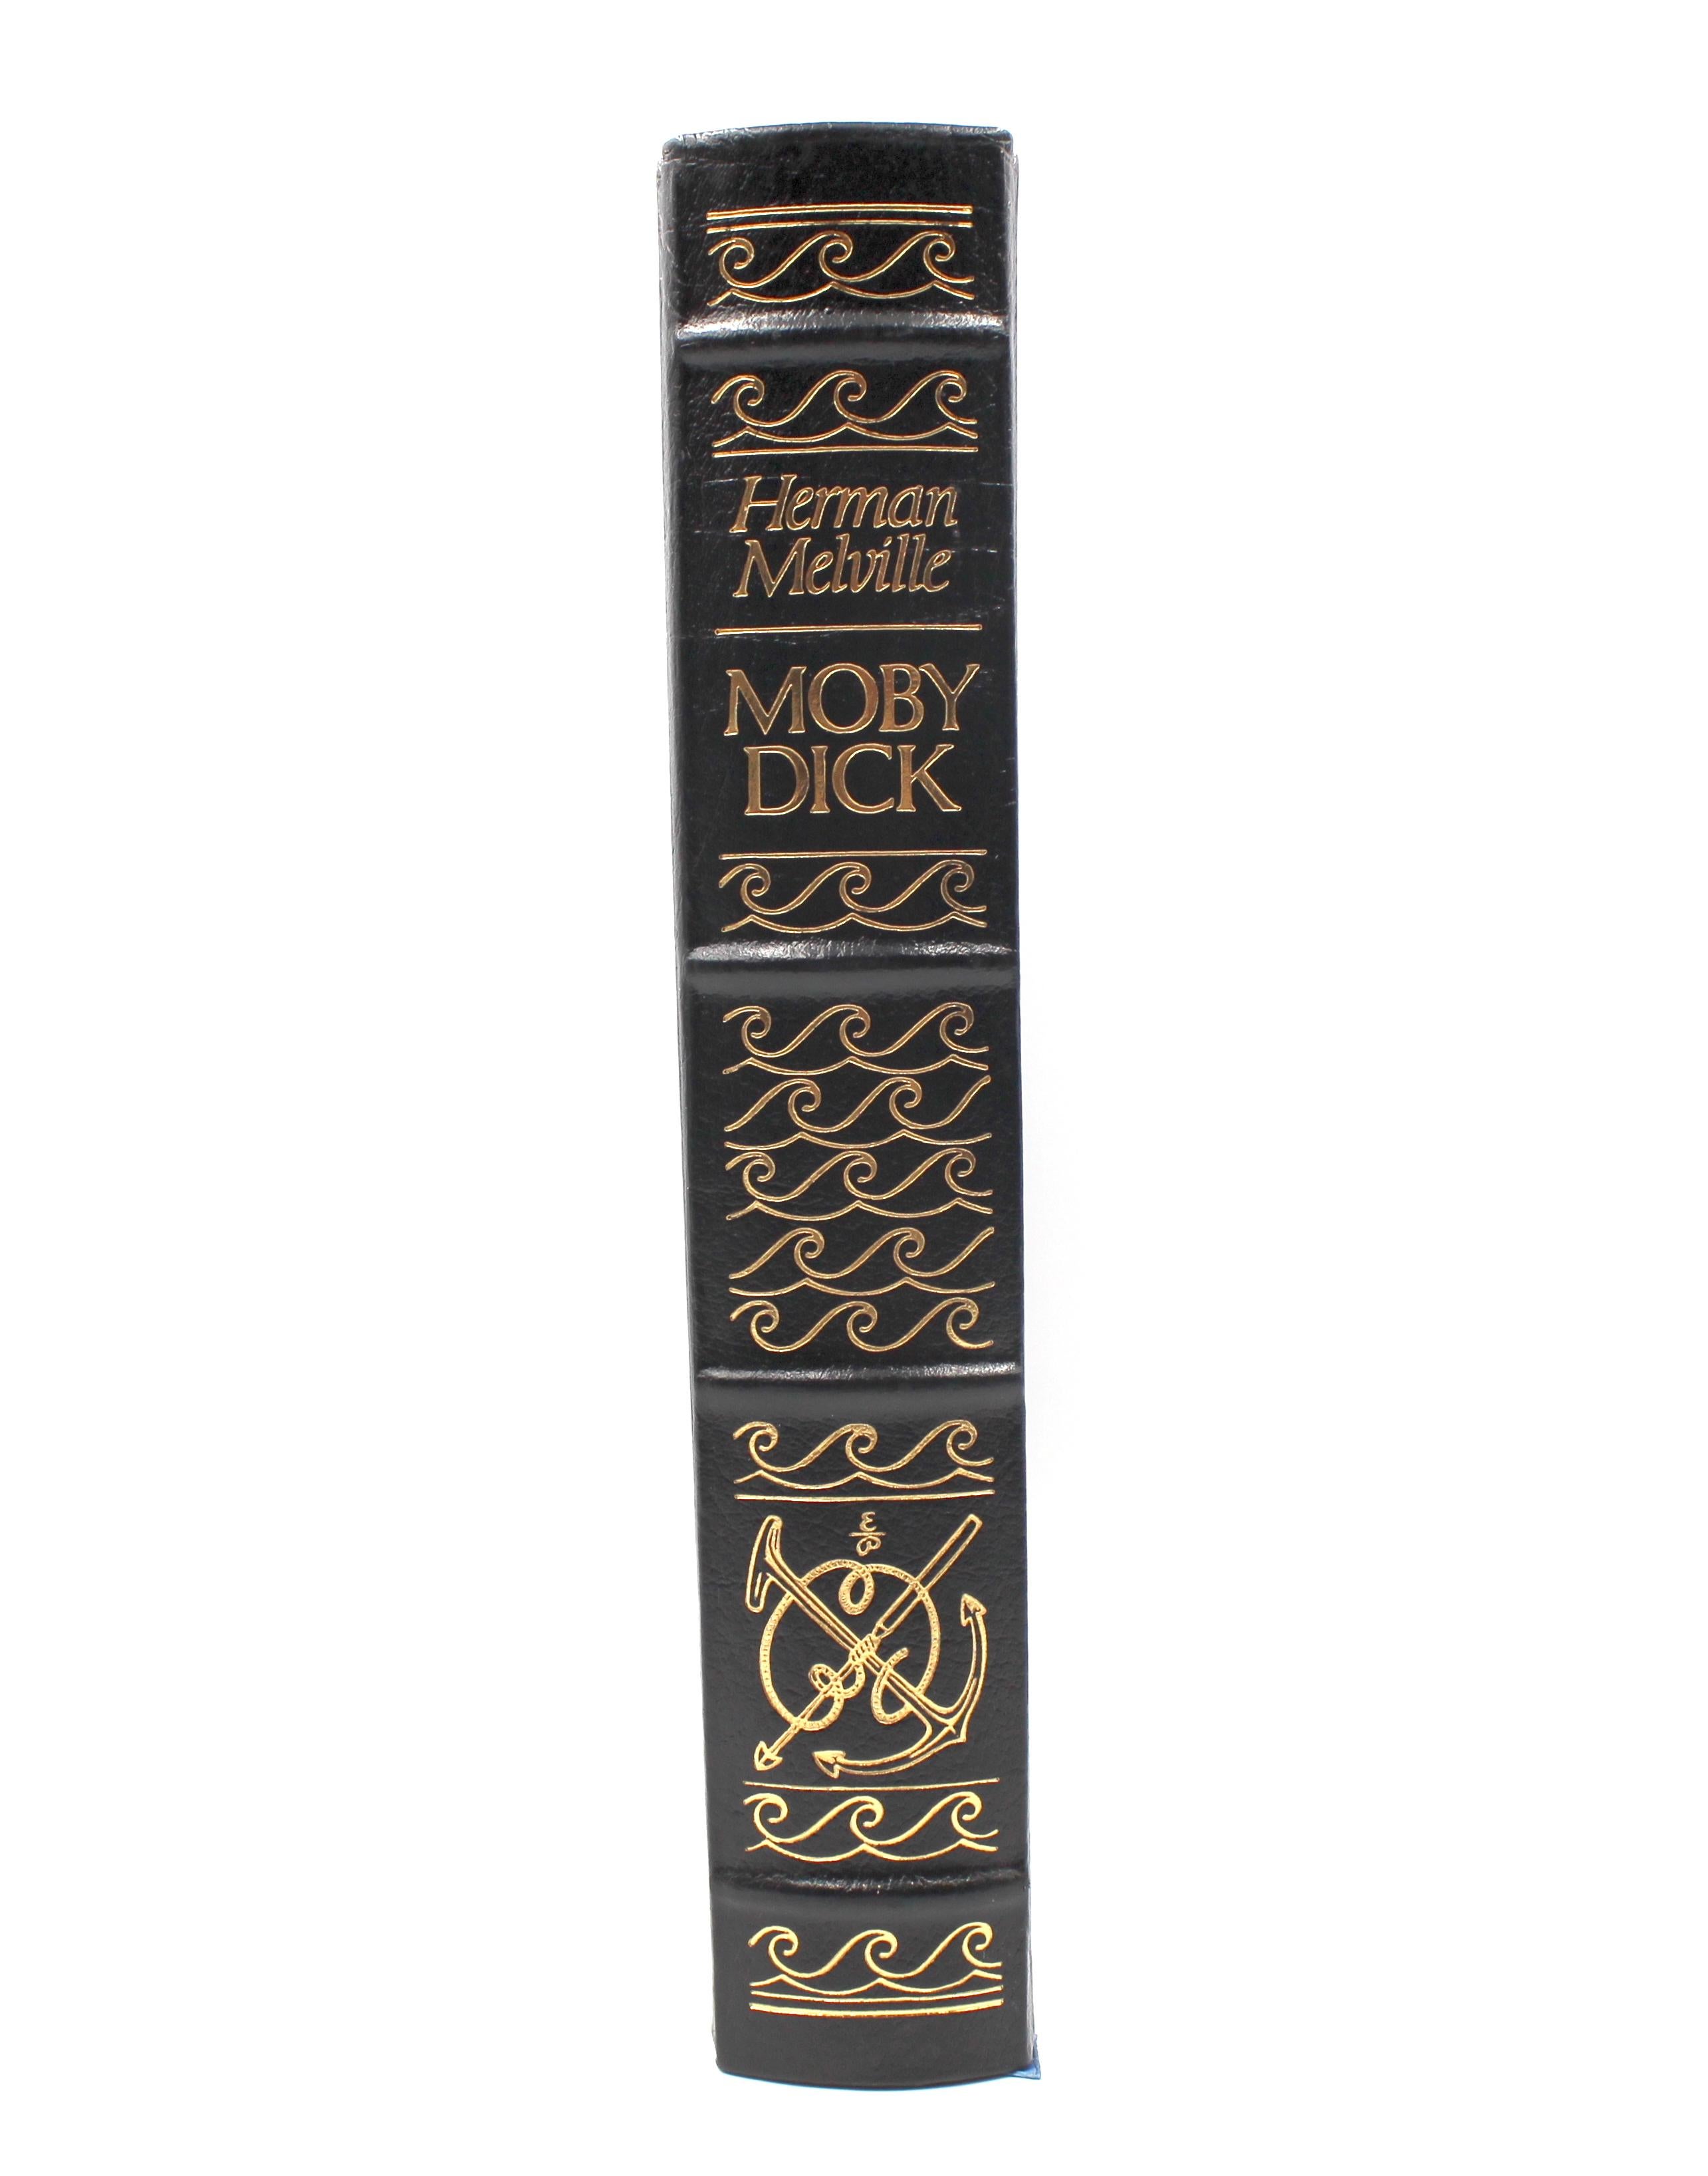 American Moby Dick, Or The Whale by Herman Melville, Easton Press Collector's Ed., 1977